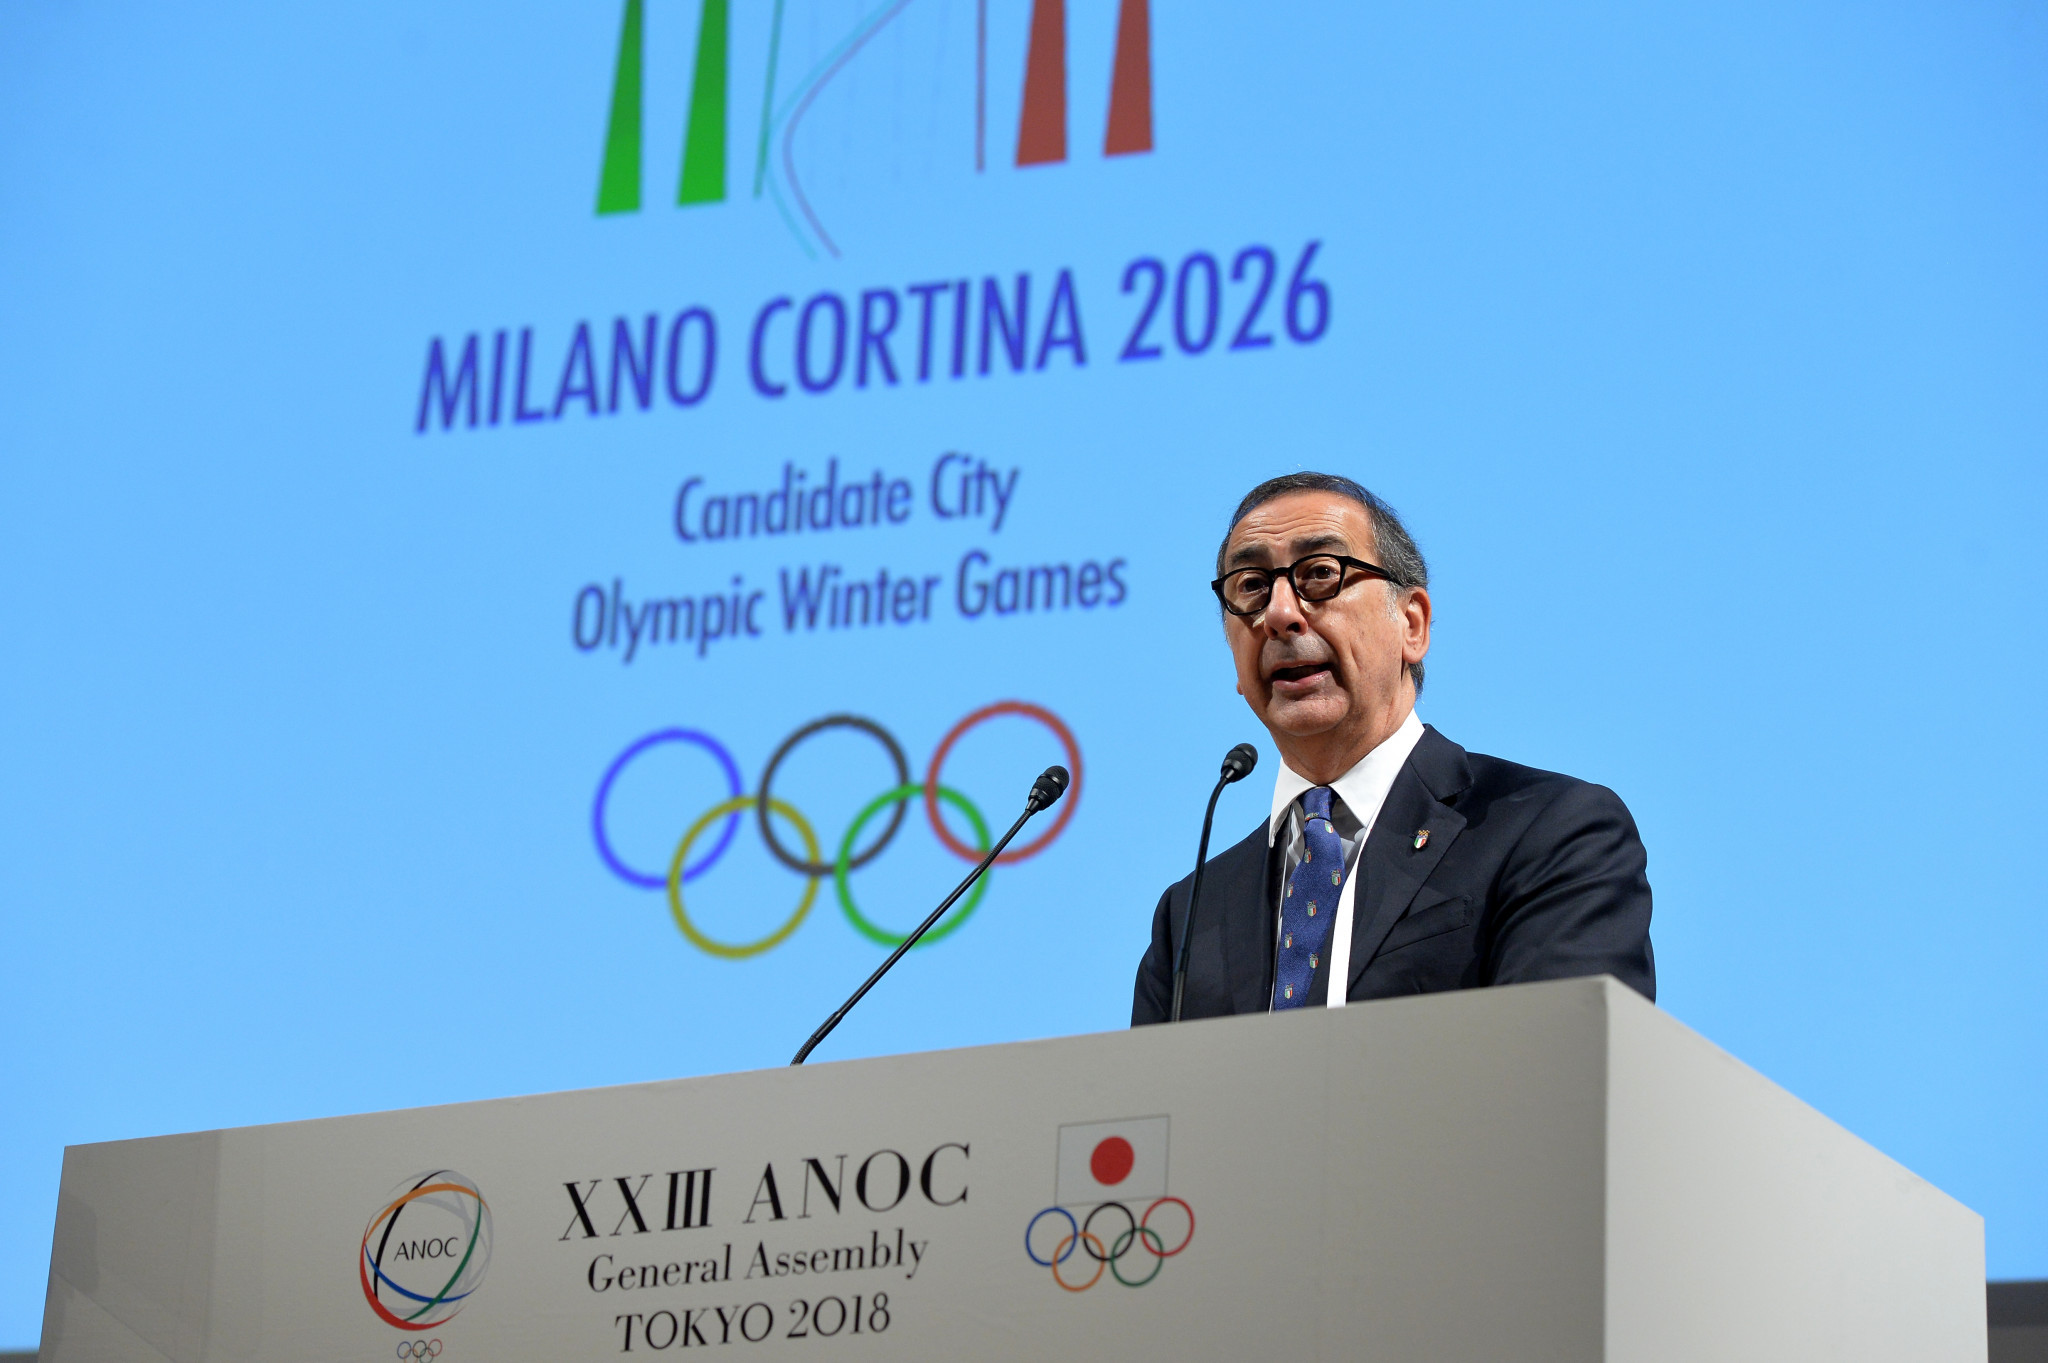 Milan-Cortina d'Ampezzo 2026 claim to have received Government support for their bid ©Getty Images